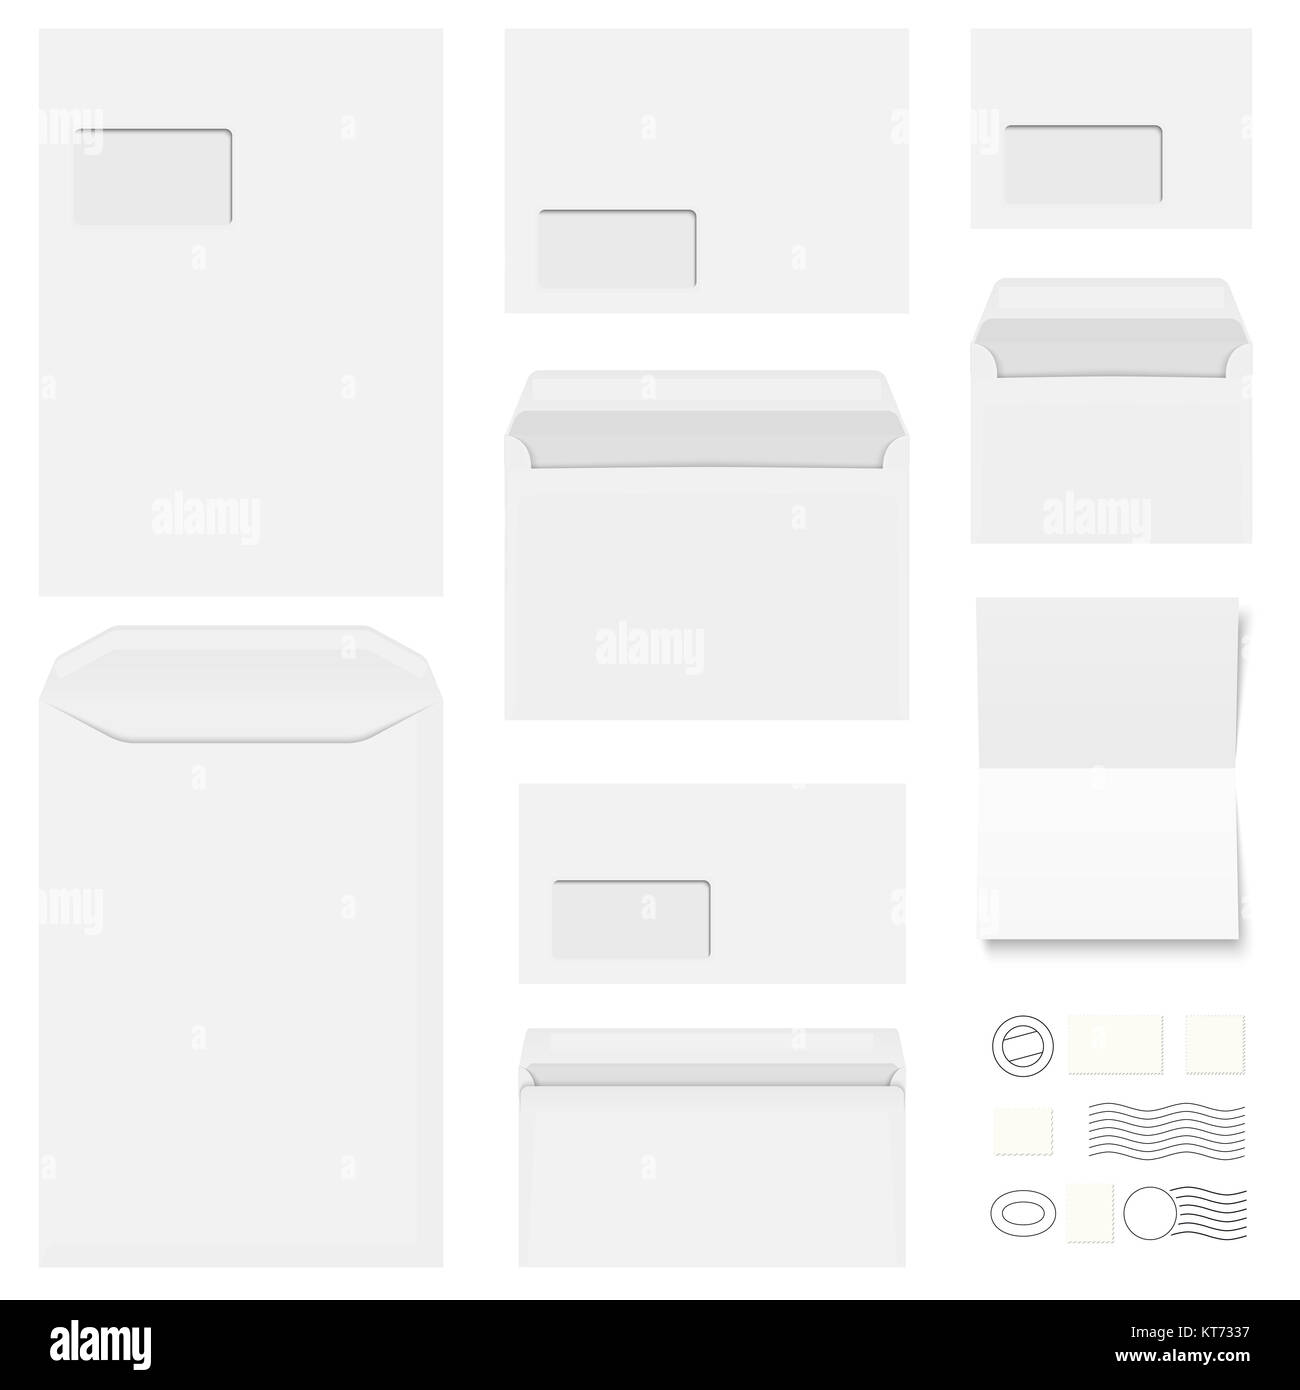 big collection of white envelopes, stationery and different post marks Stock Photo